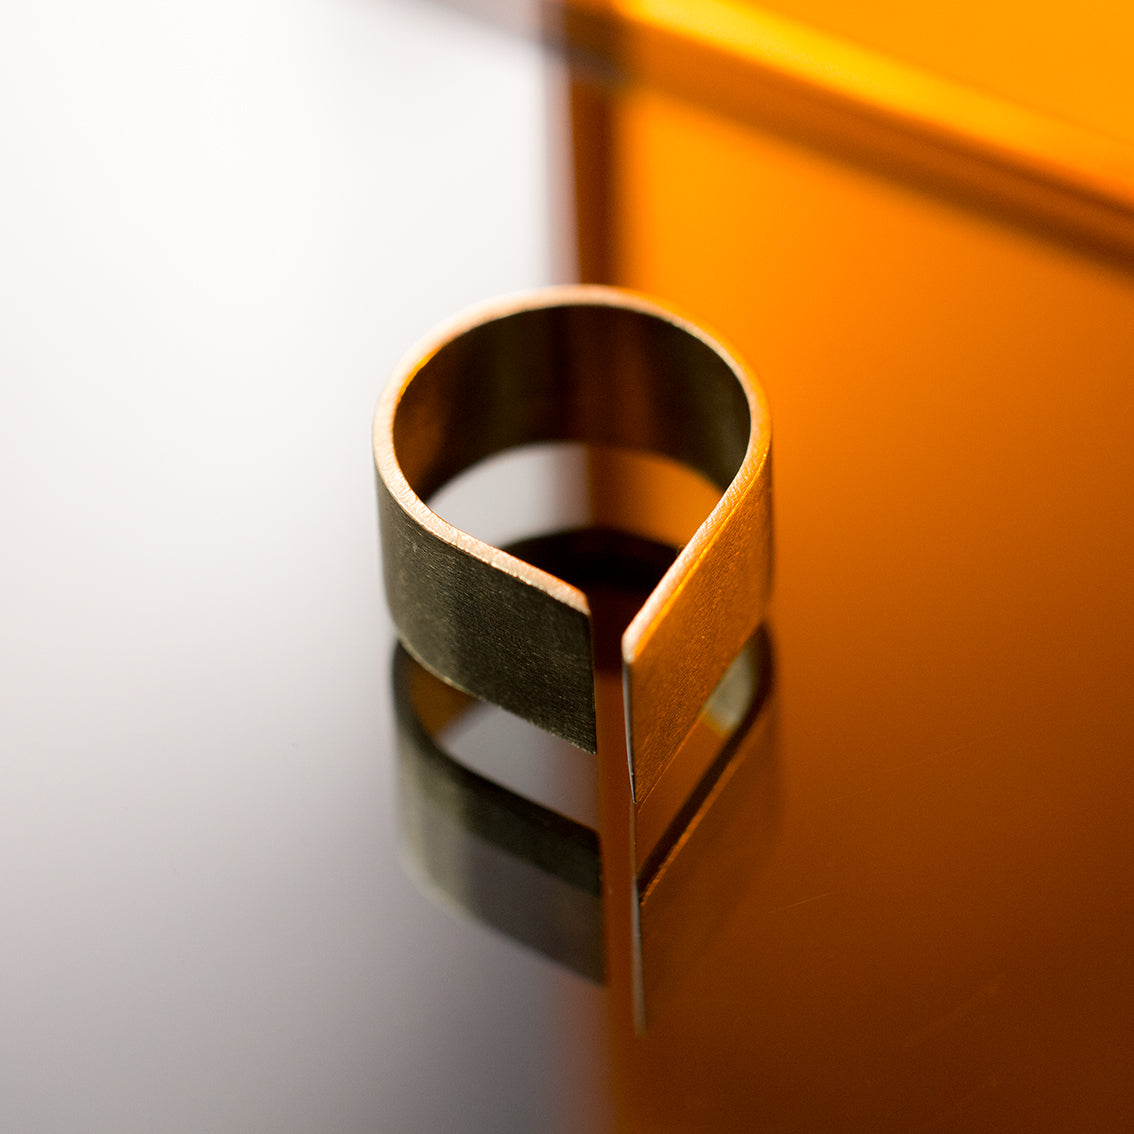 A shiny gold coloured ring with a very simple design is placed on a reflective surface. The ring is made of brushed brass and the shape is similar to a rain drop with a thin opening on top. The sharp edges of the 10mm thick band are catching the light softly to reveal the shape of the ring. There is an orange tinted glass behind and the reflection of this is also visible on the mirror surface.